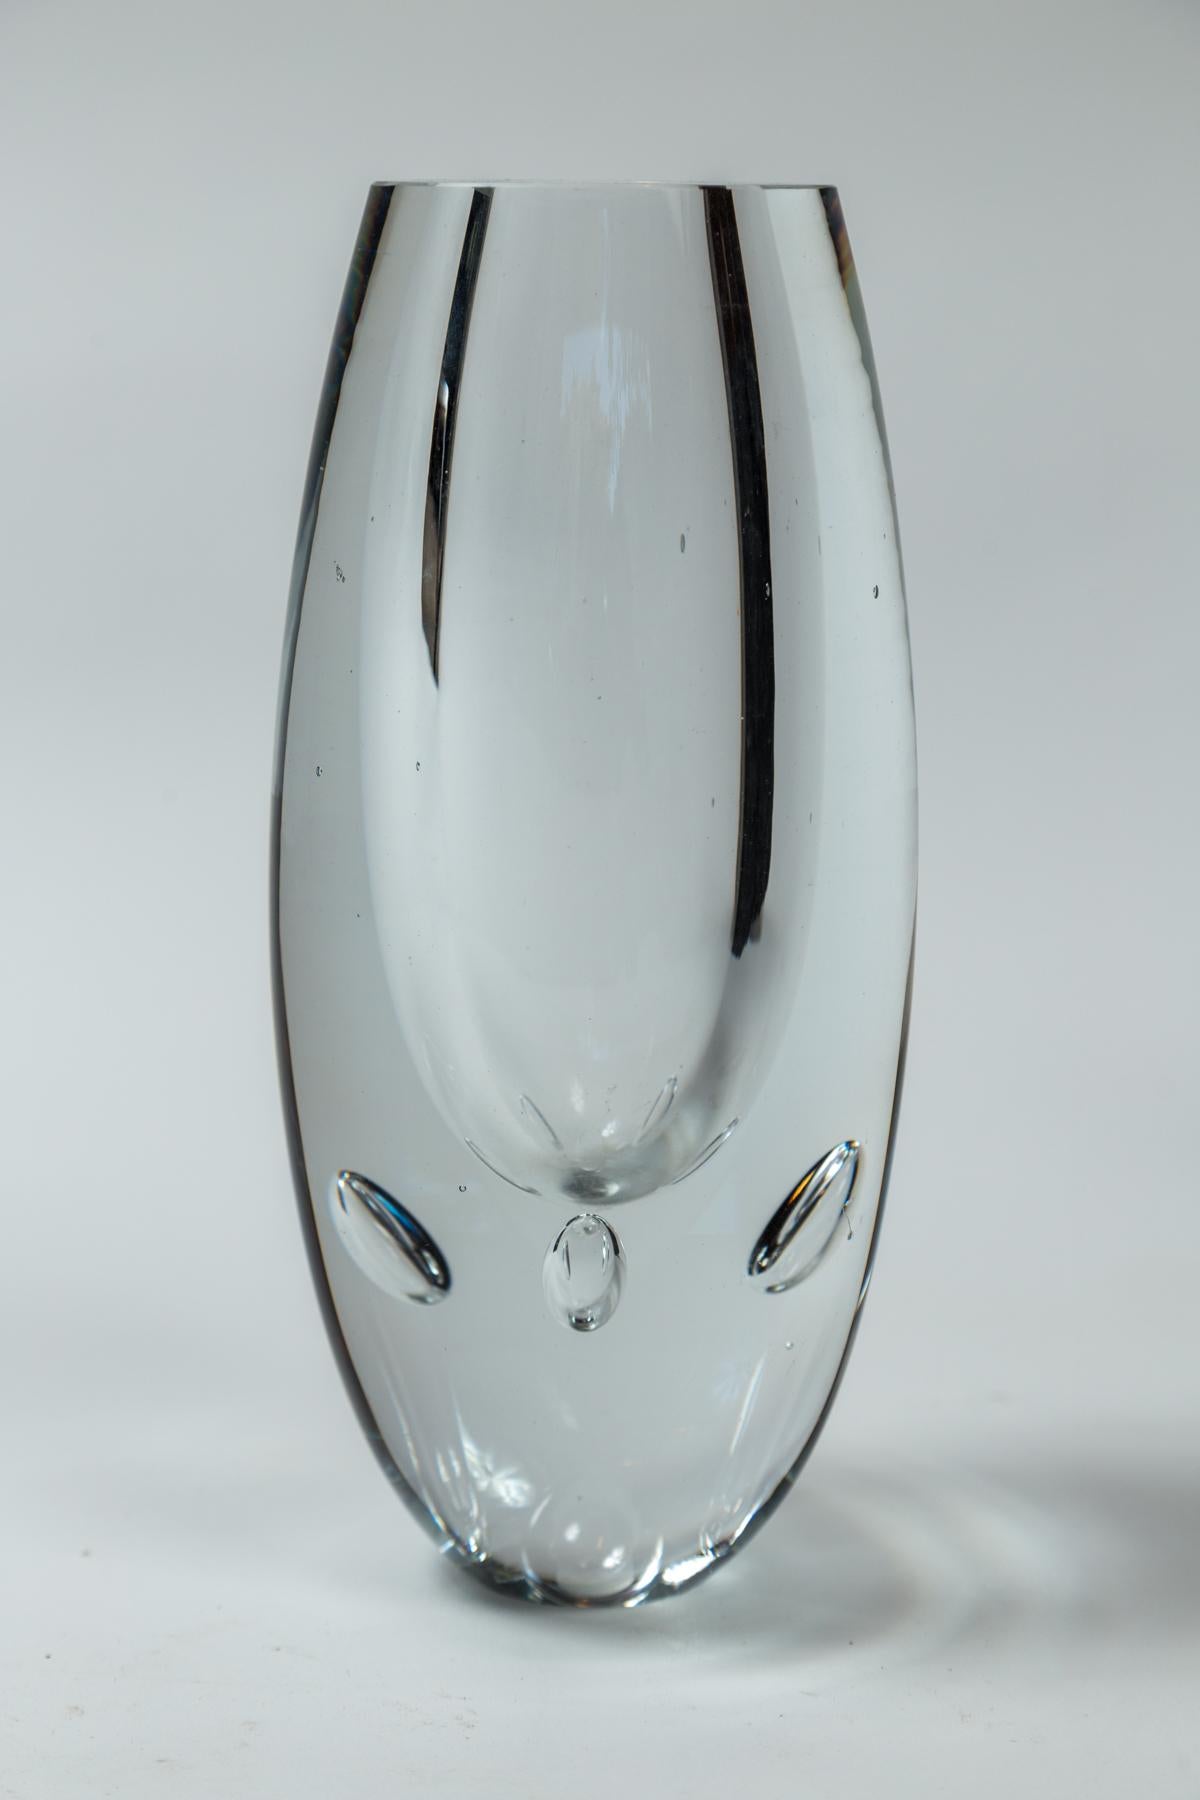 Vintage Glass Vase, Timo Sarpeneva, Finland. Heavy, blown glass vase with internal bubbles. An iconic design by renown Scandinavian designer, Timo Sarpeneva. Etched signature on bottom.